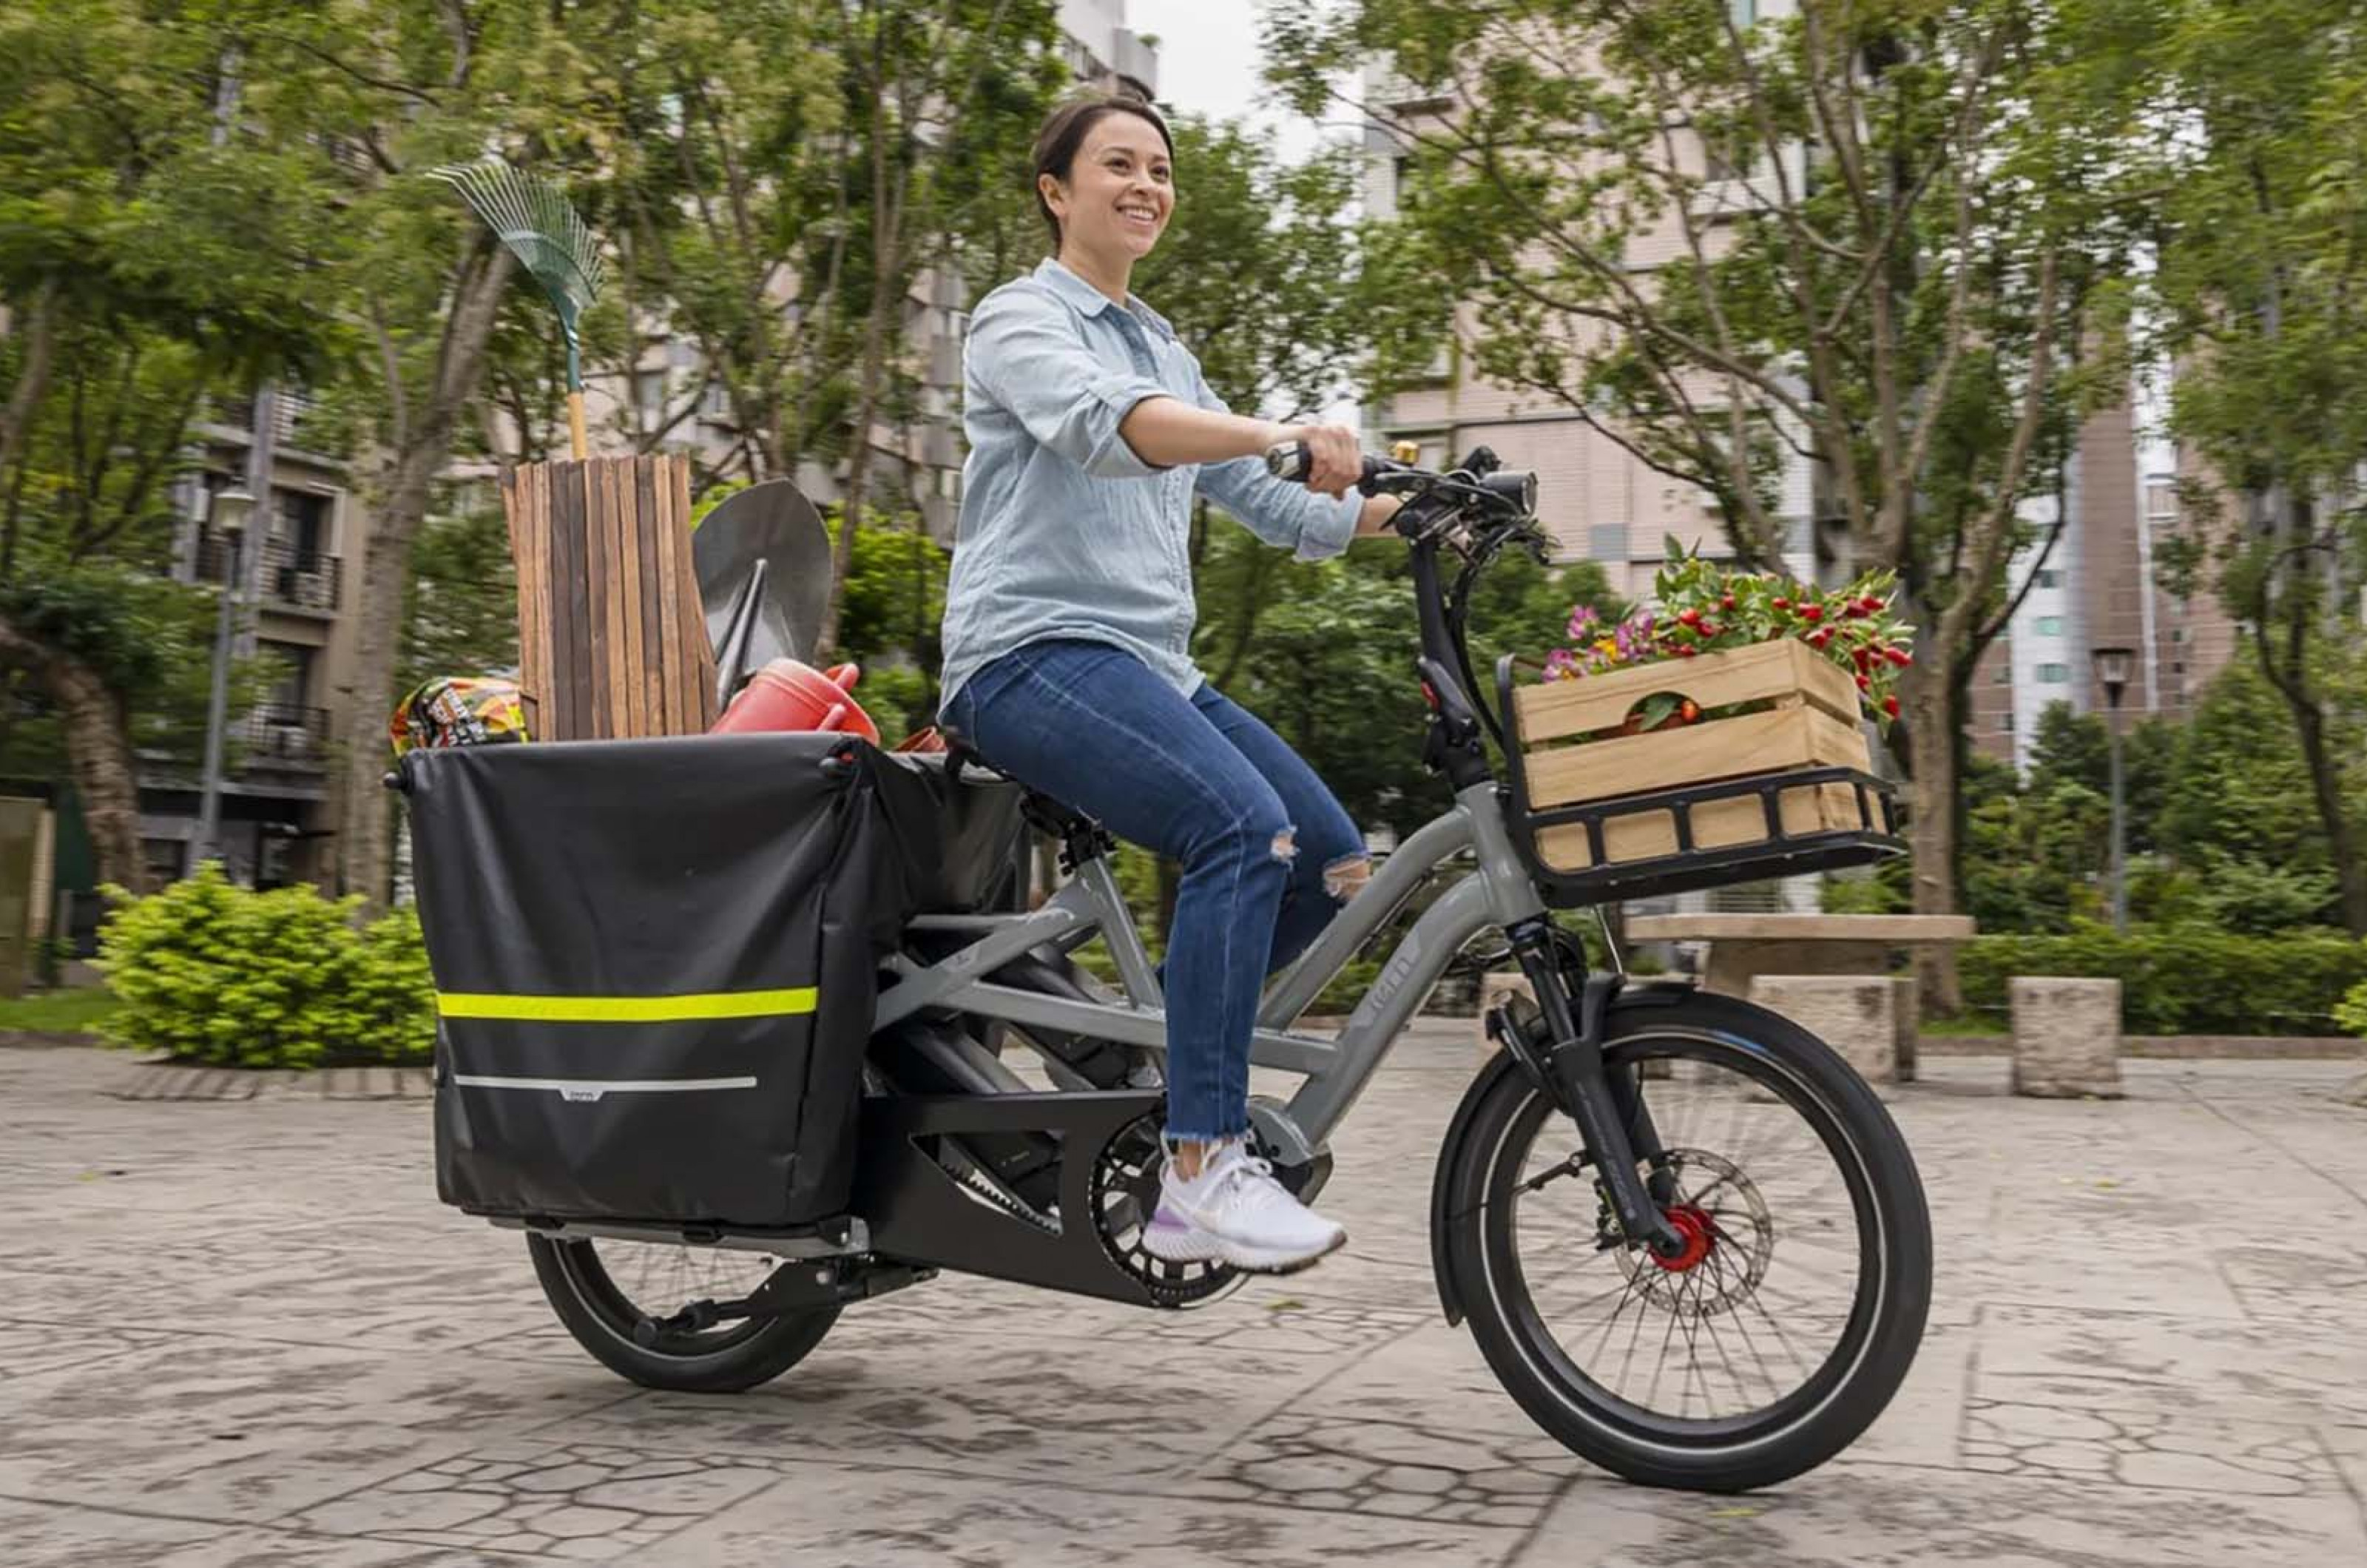 <p>While it might be a more expensive option, the Tern GSD S10 is a great cargo bike that is packed full of useful kit. The rear-loading machine can carry up to 200kg, but thanks to its slim design, can be stored vertically to save space. </p>  <p>Because there is room for kids in the hopper and your food shopping, the GSD S10 is one of the most convincing electric bikes that could replace your car.</p>